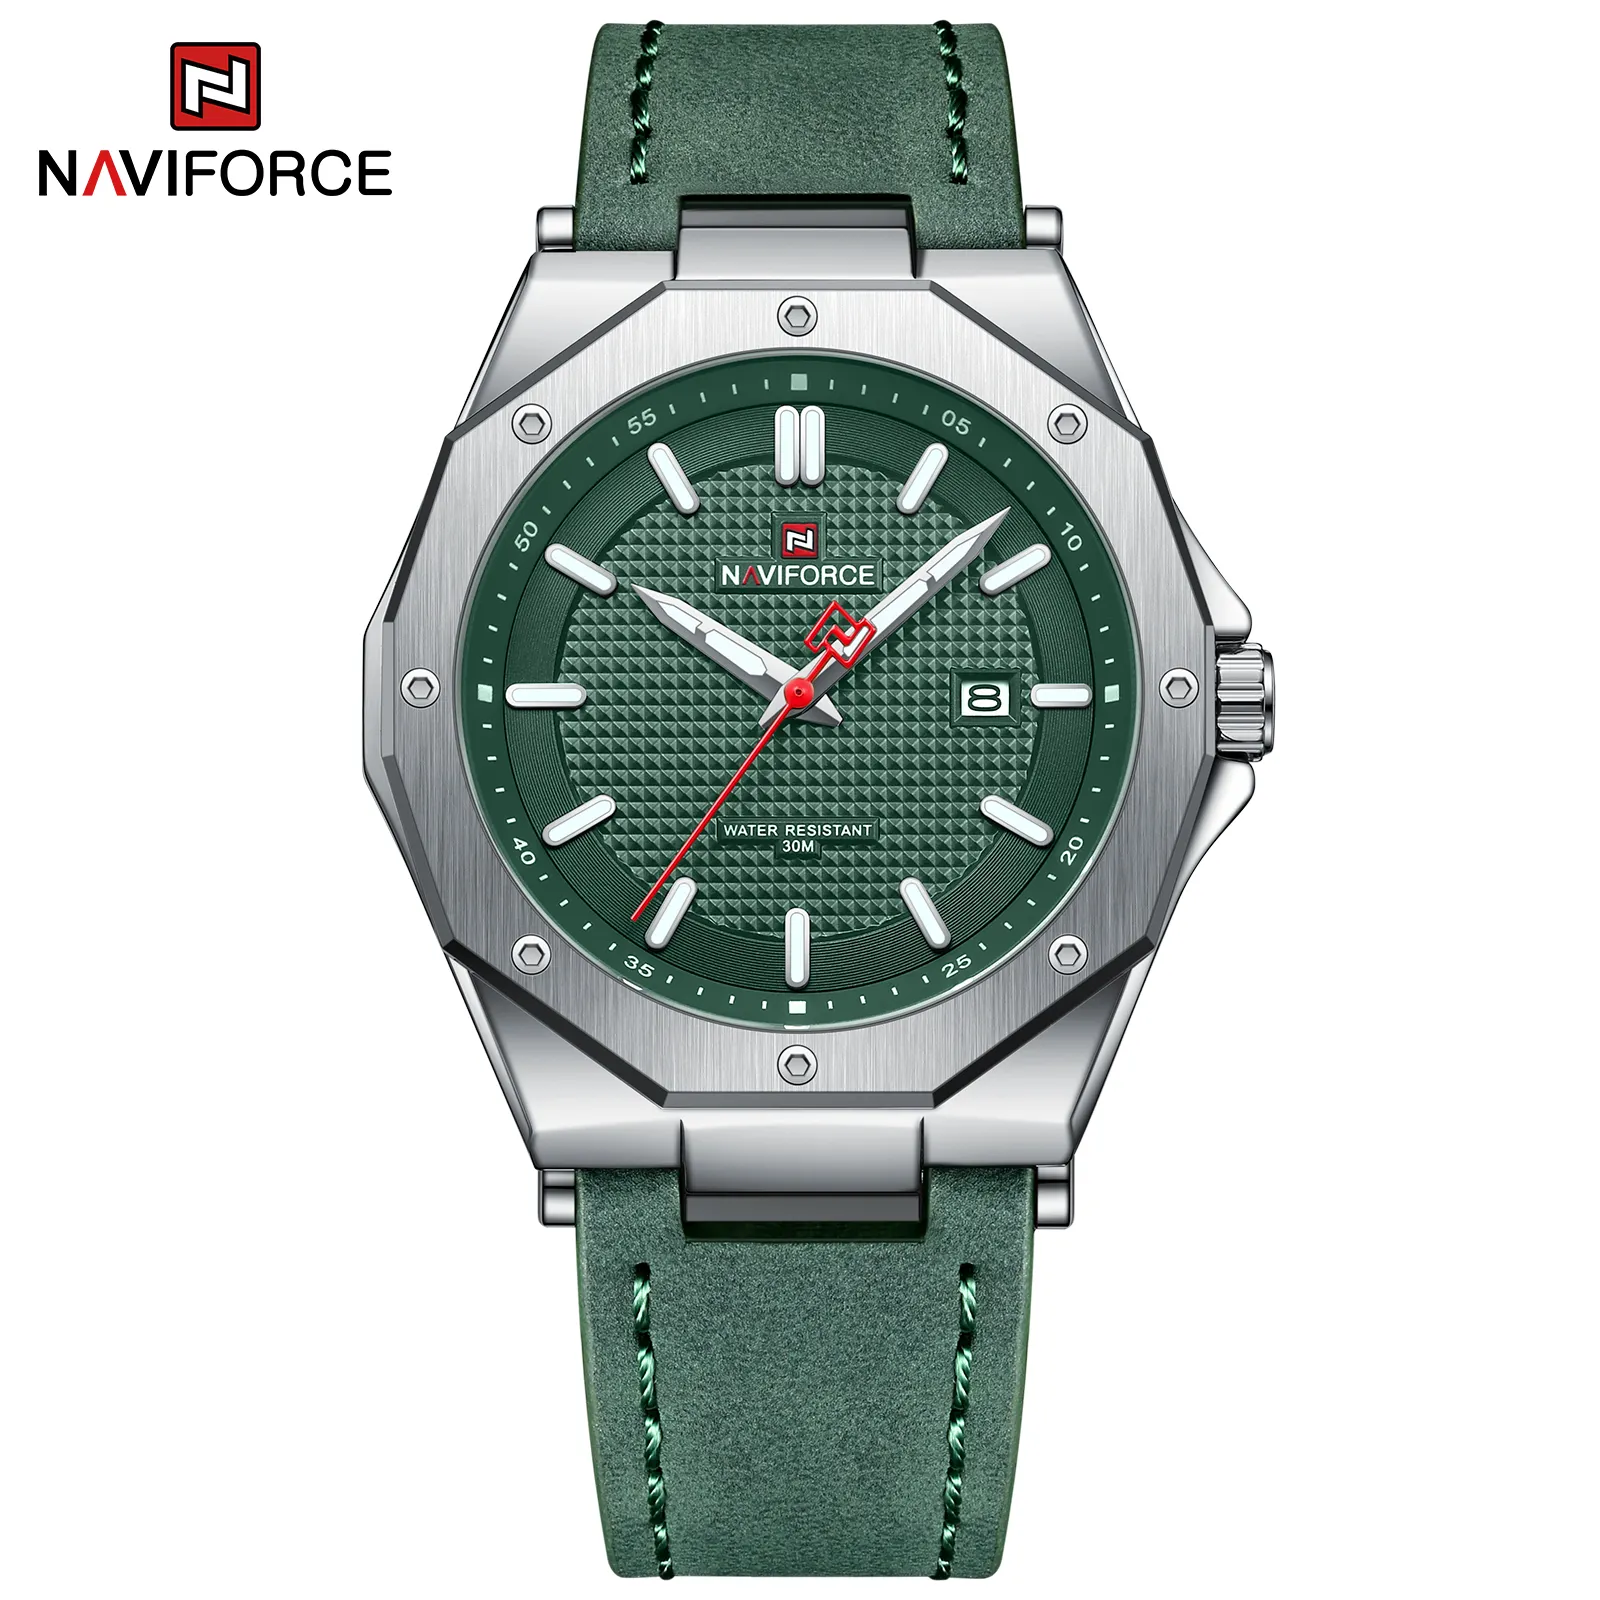 New Model Quality Watch NAVIFORCE 9200L Men Quartz Luxury Wrist Watches For Male With Genuine Leather Strap Luminous Hands